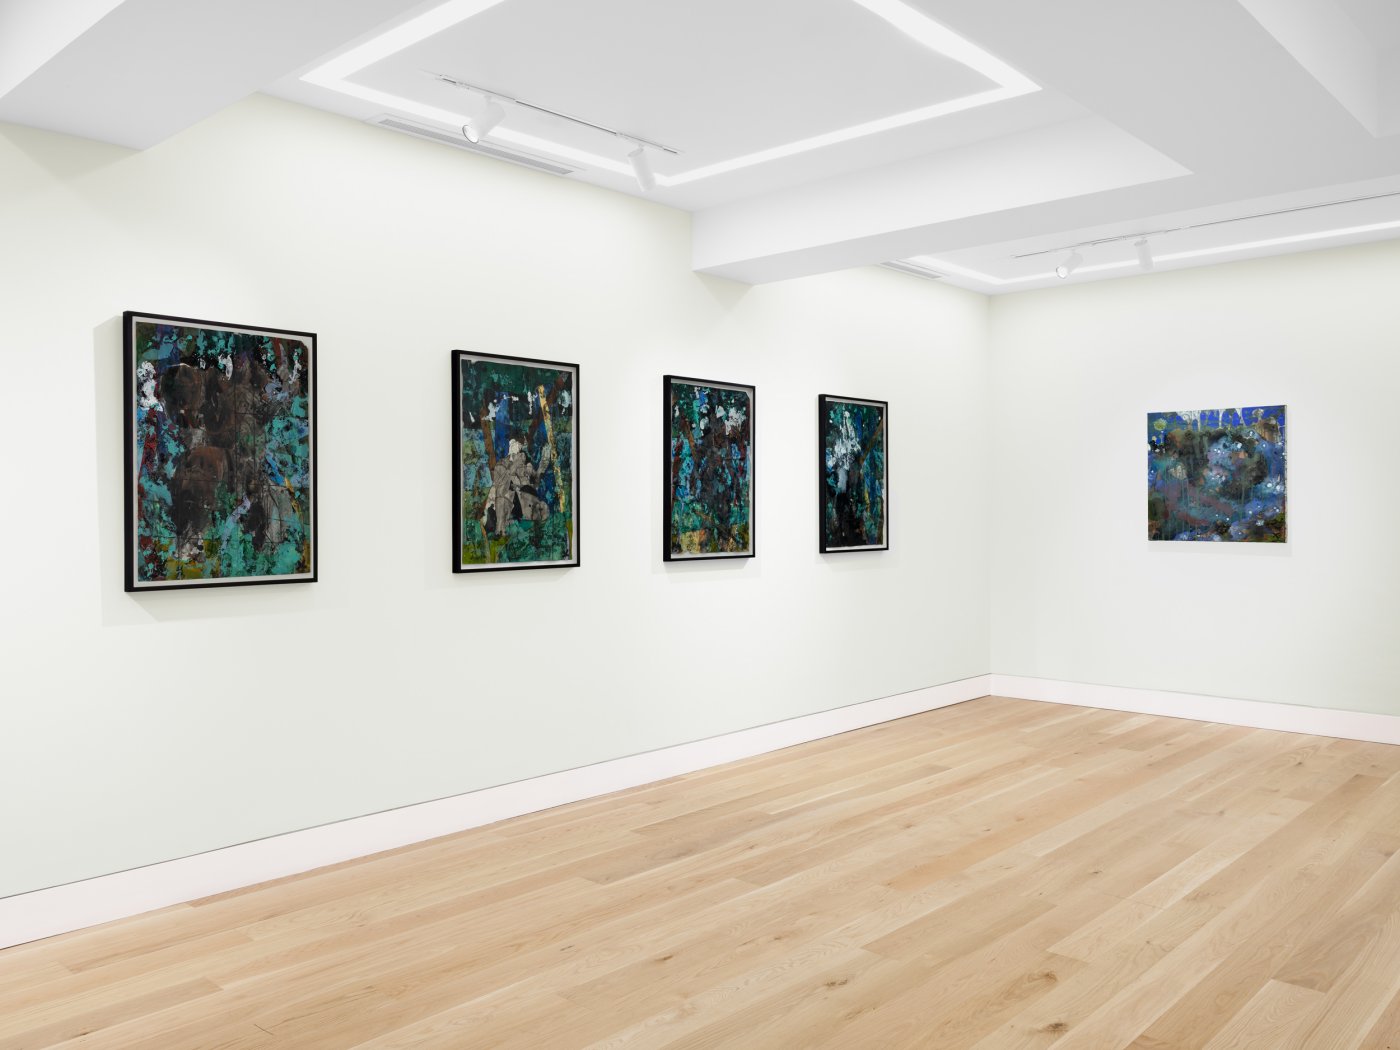 Installation image for Deanio X: Symphony of Storms, at Marlborough